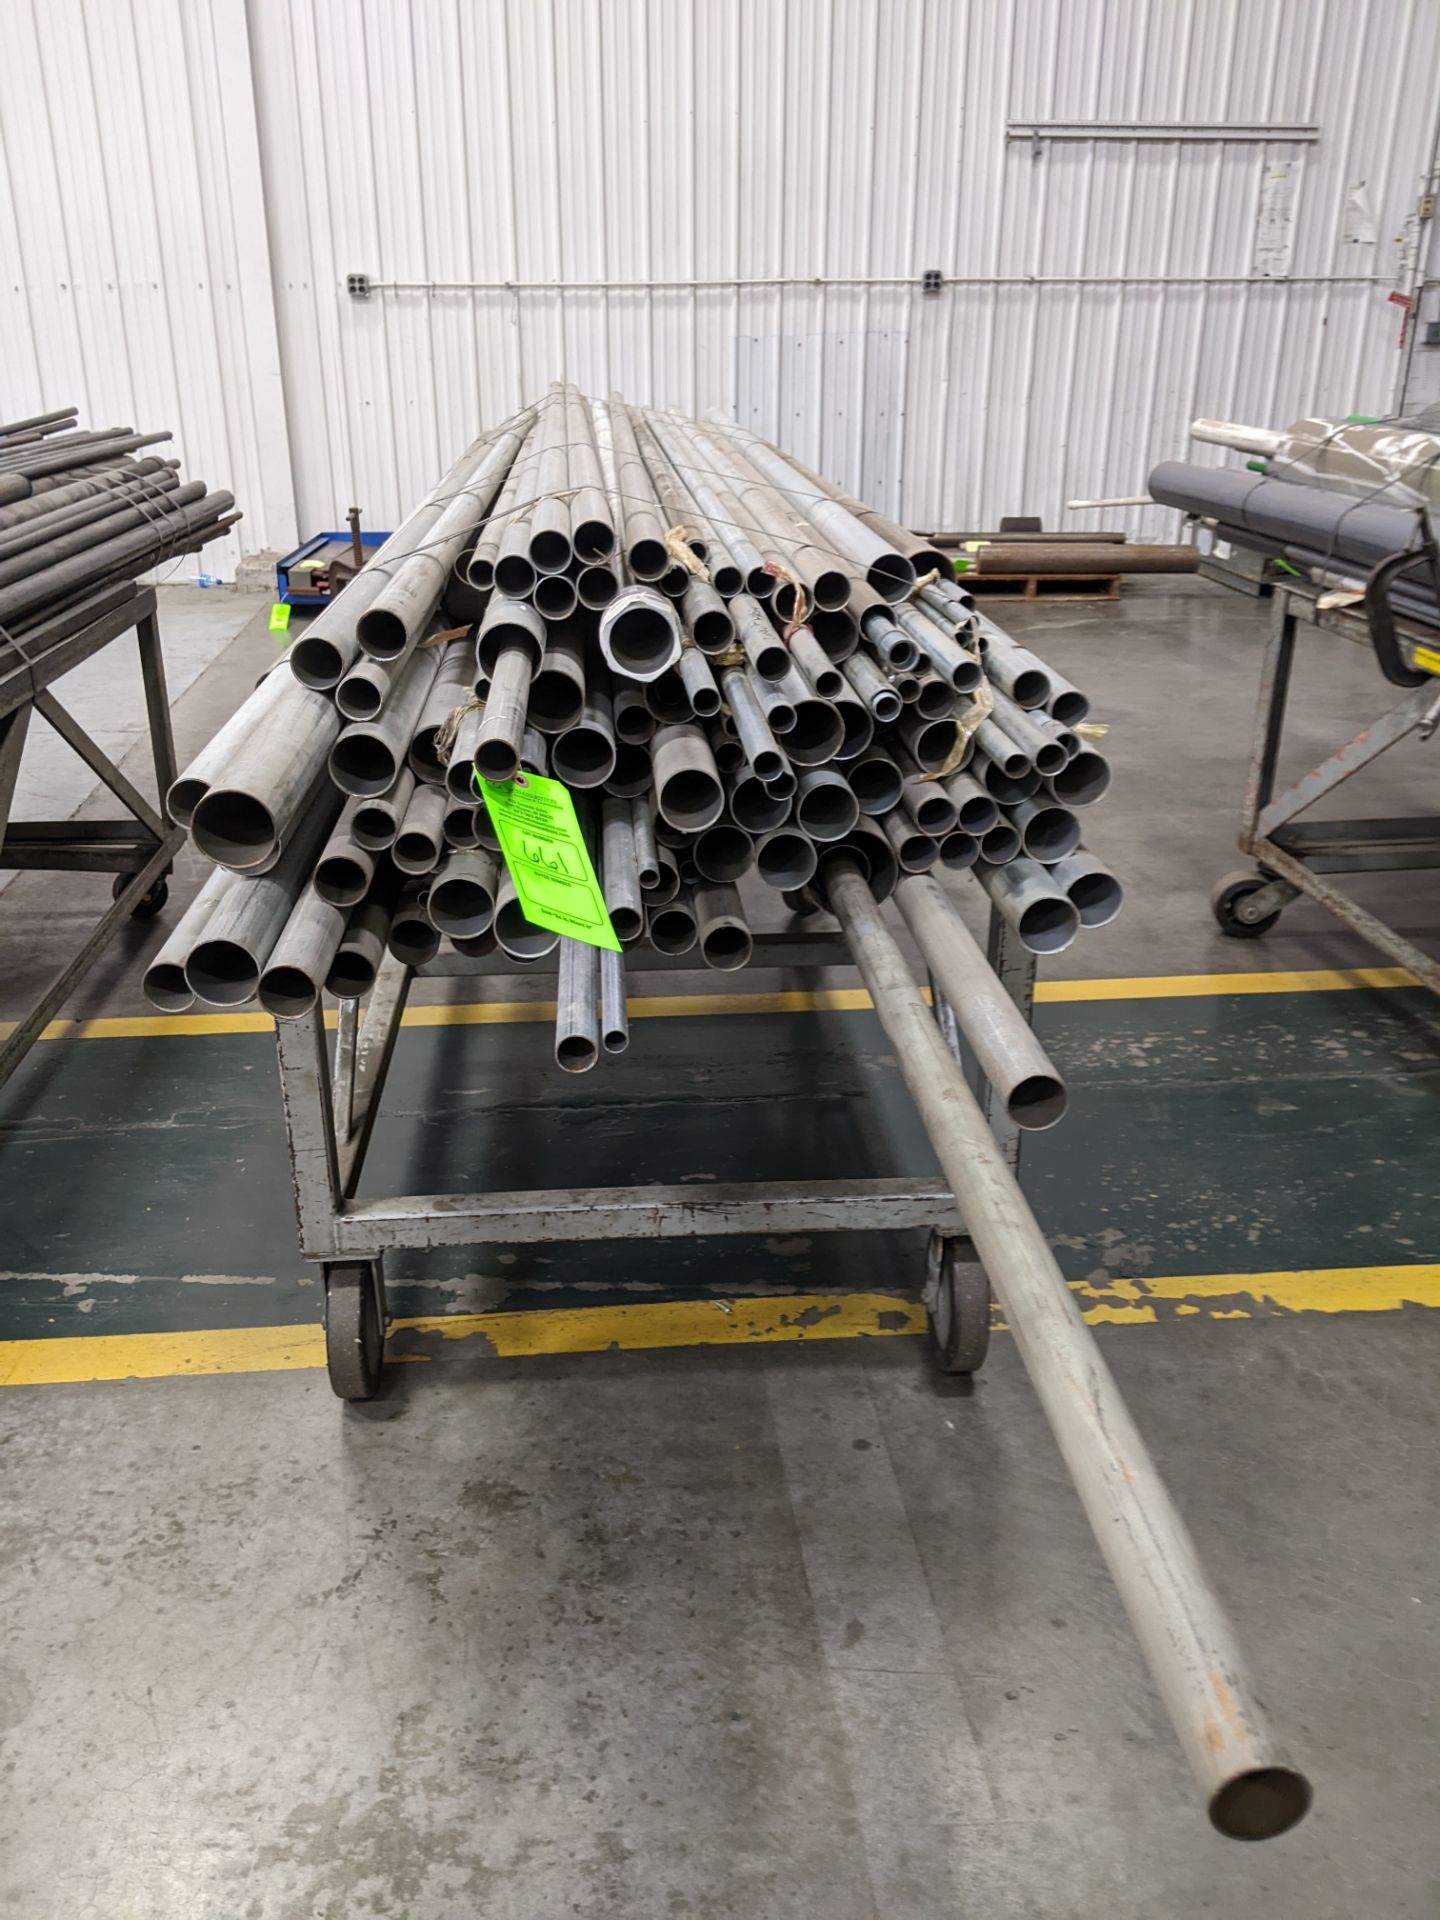 PALLET AND CONTENT-ALUMINUM AND CONDUIT PIPING